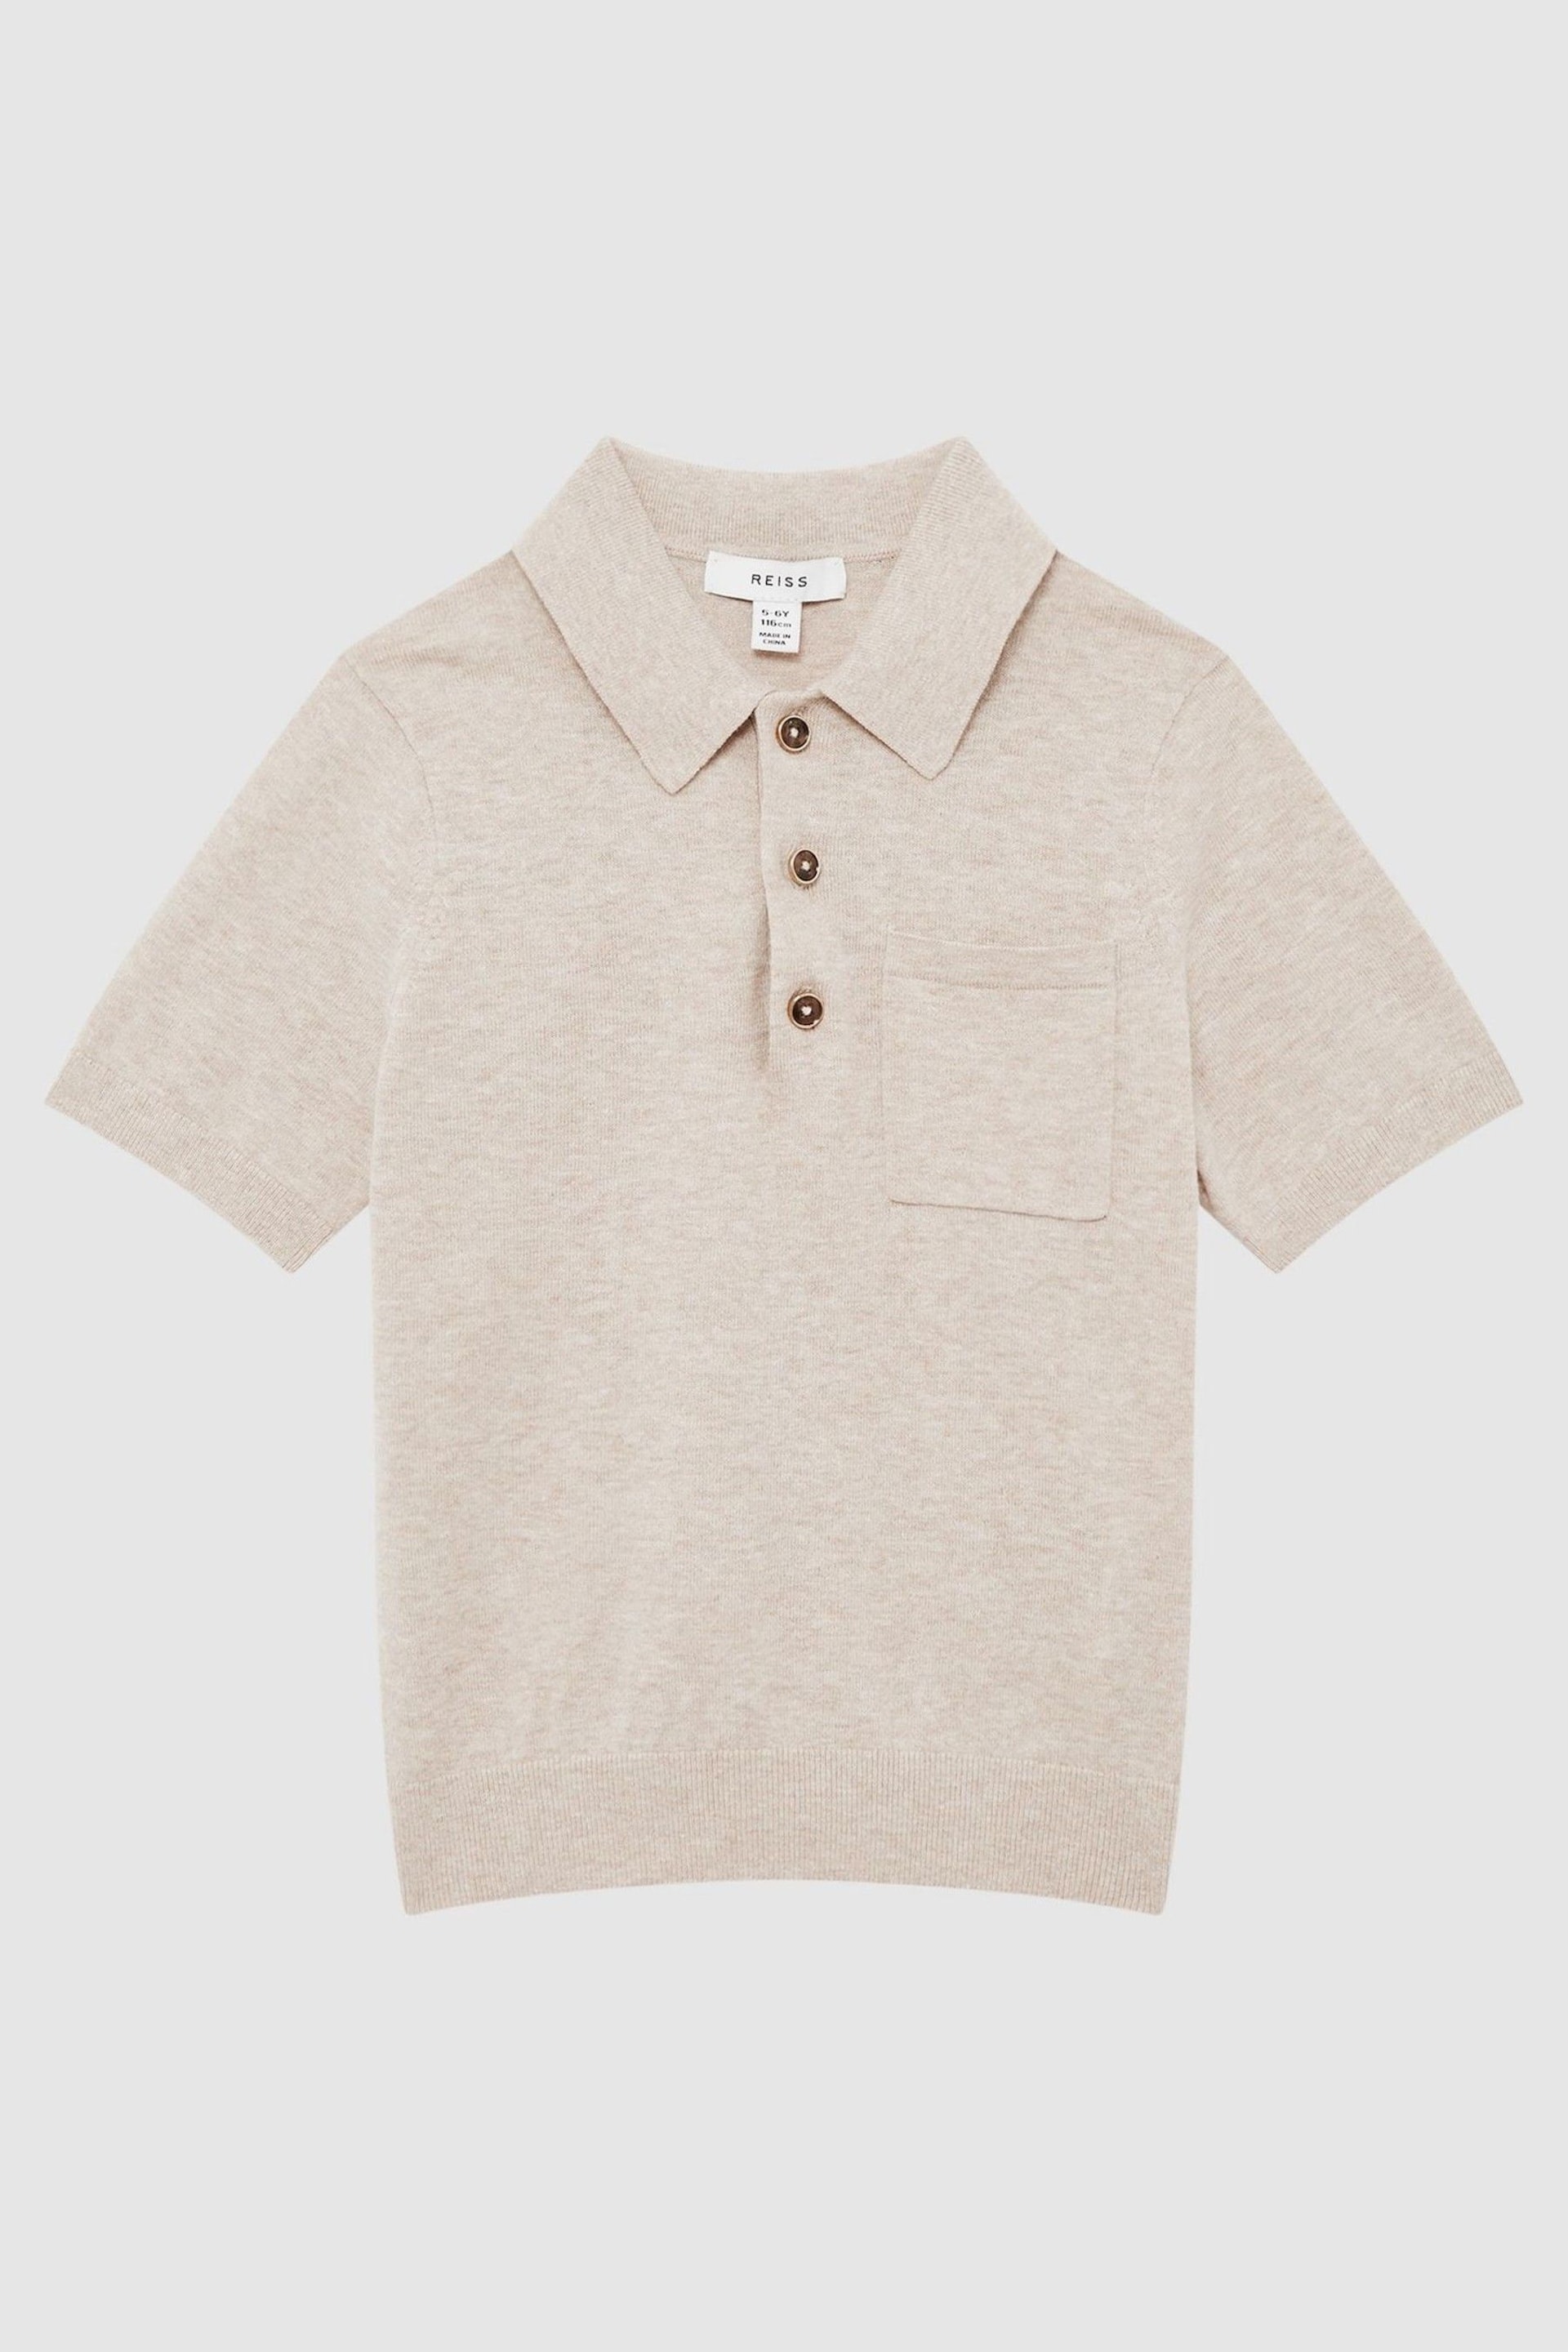 Reiss Oatmeal Ralphy Junior Buttoned Linen Polo - Image 2 of 6